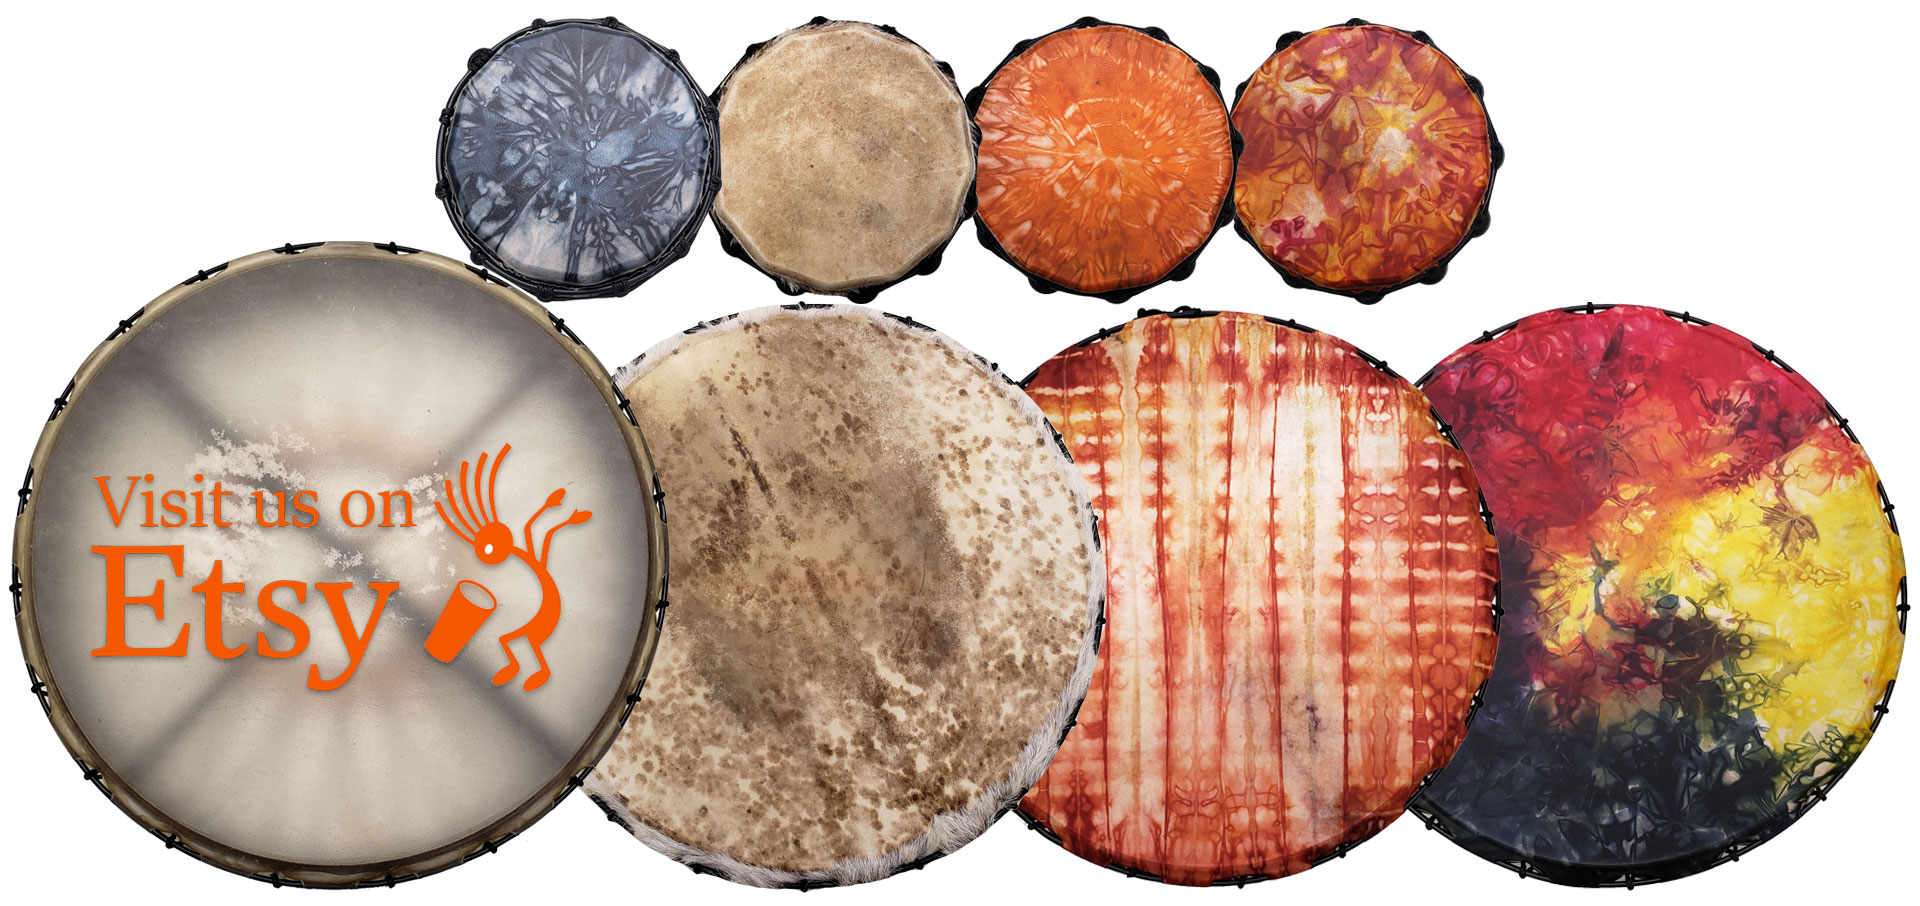 New World Drums - Visit Our Store on Etsy - new drums in stock!